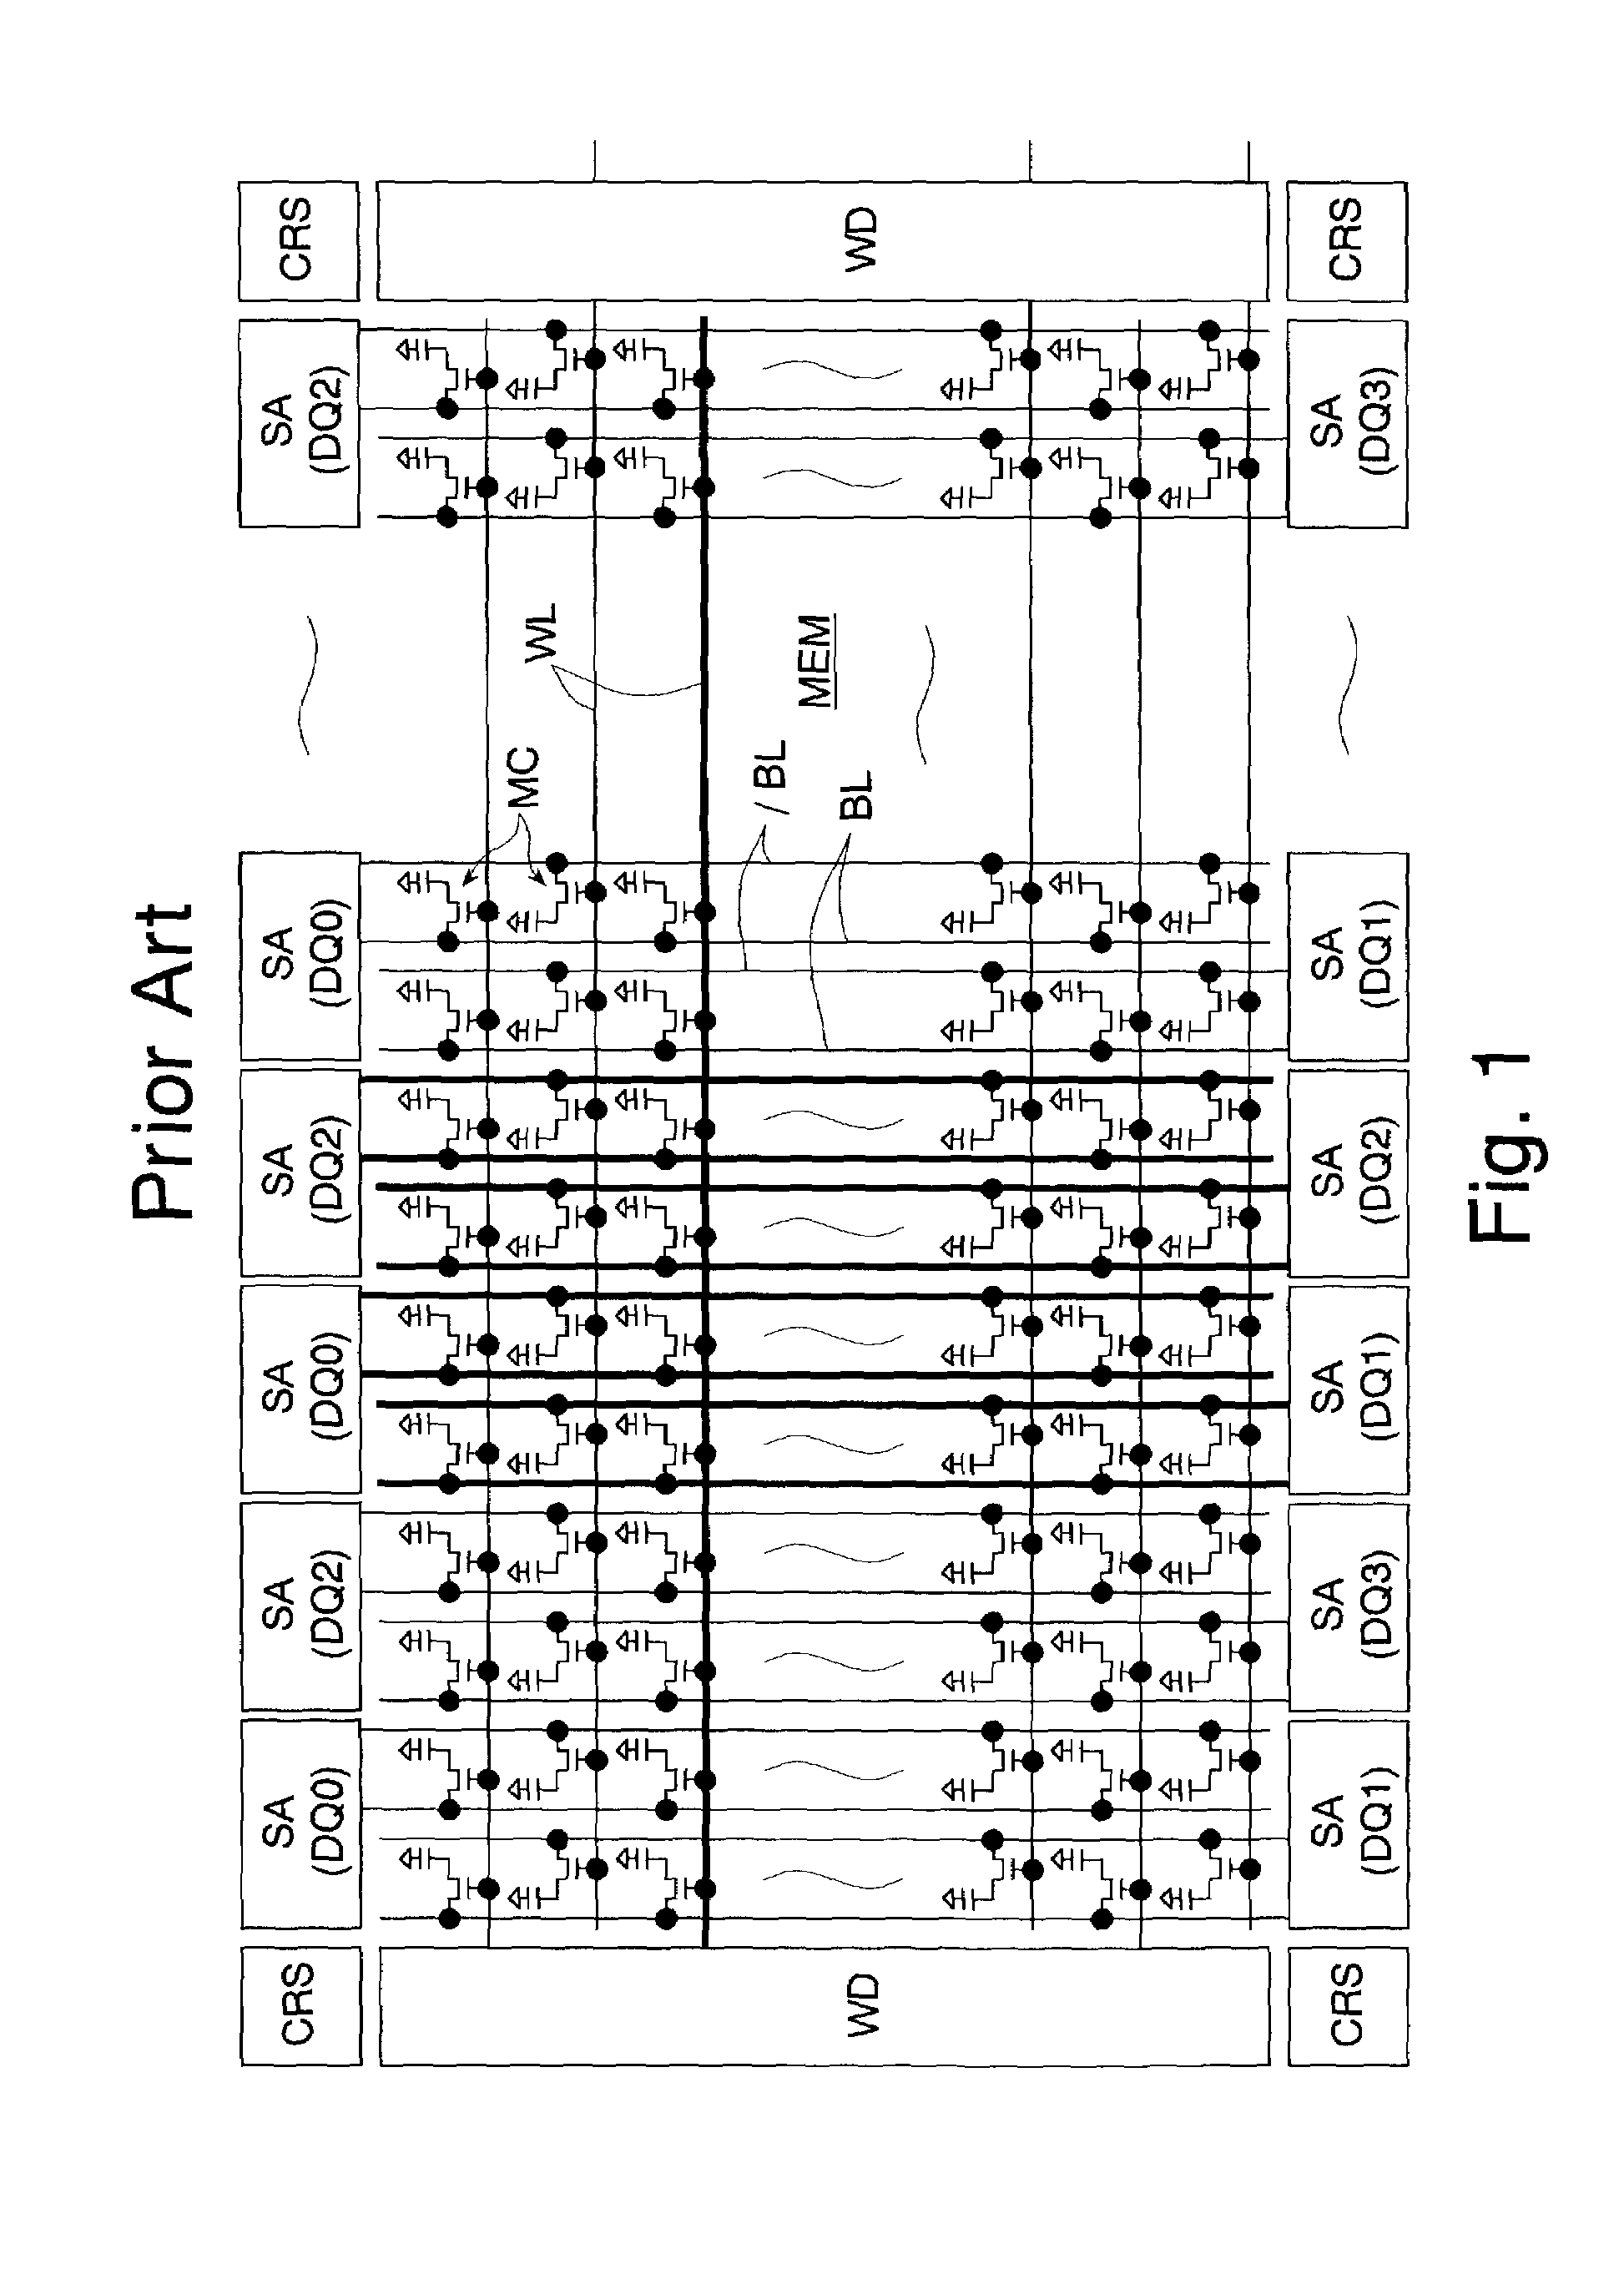 Semiconductor memory having dummy regions in memory cell array